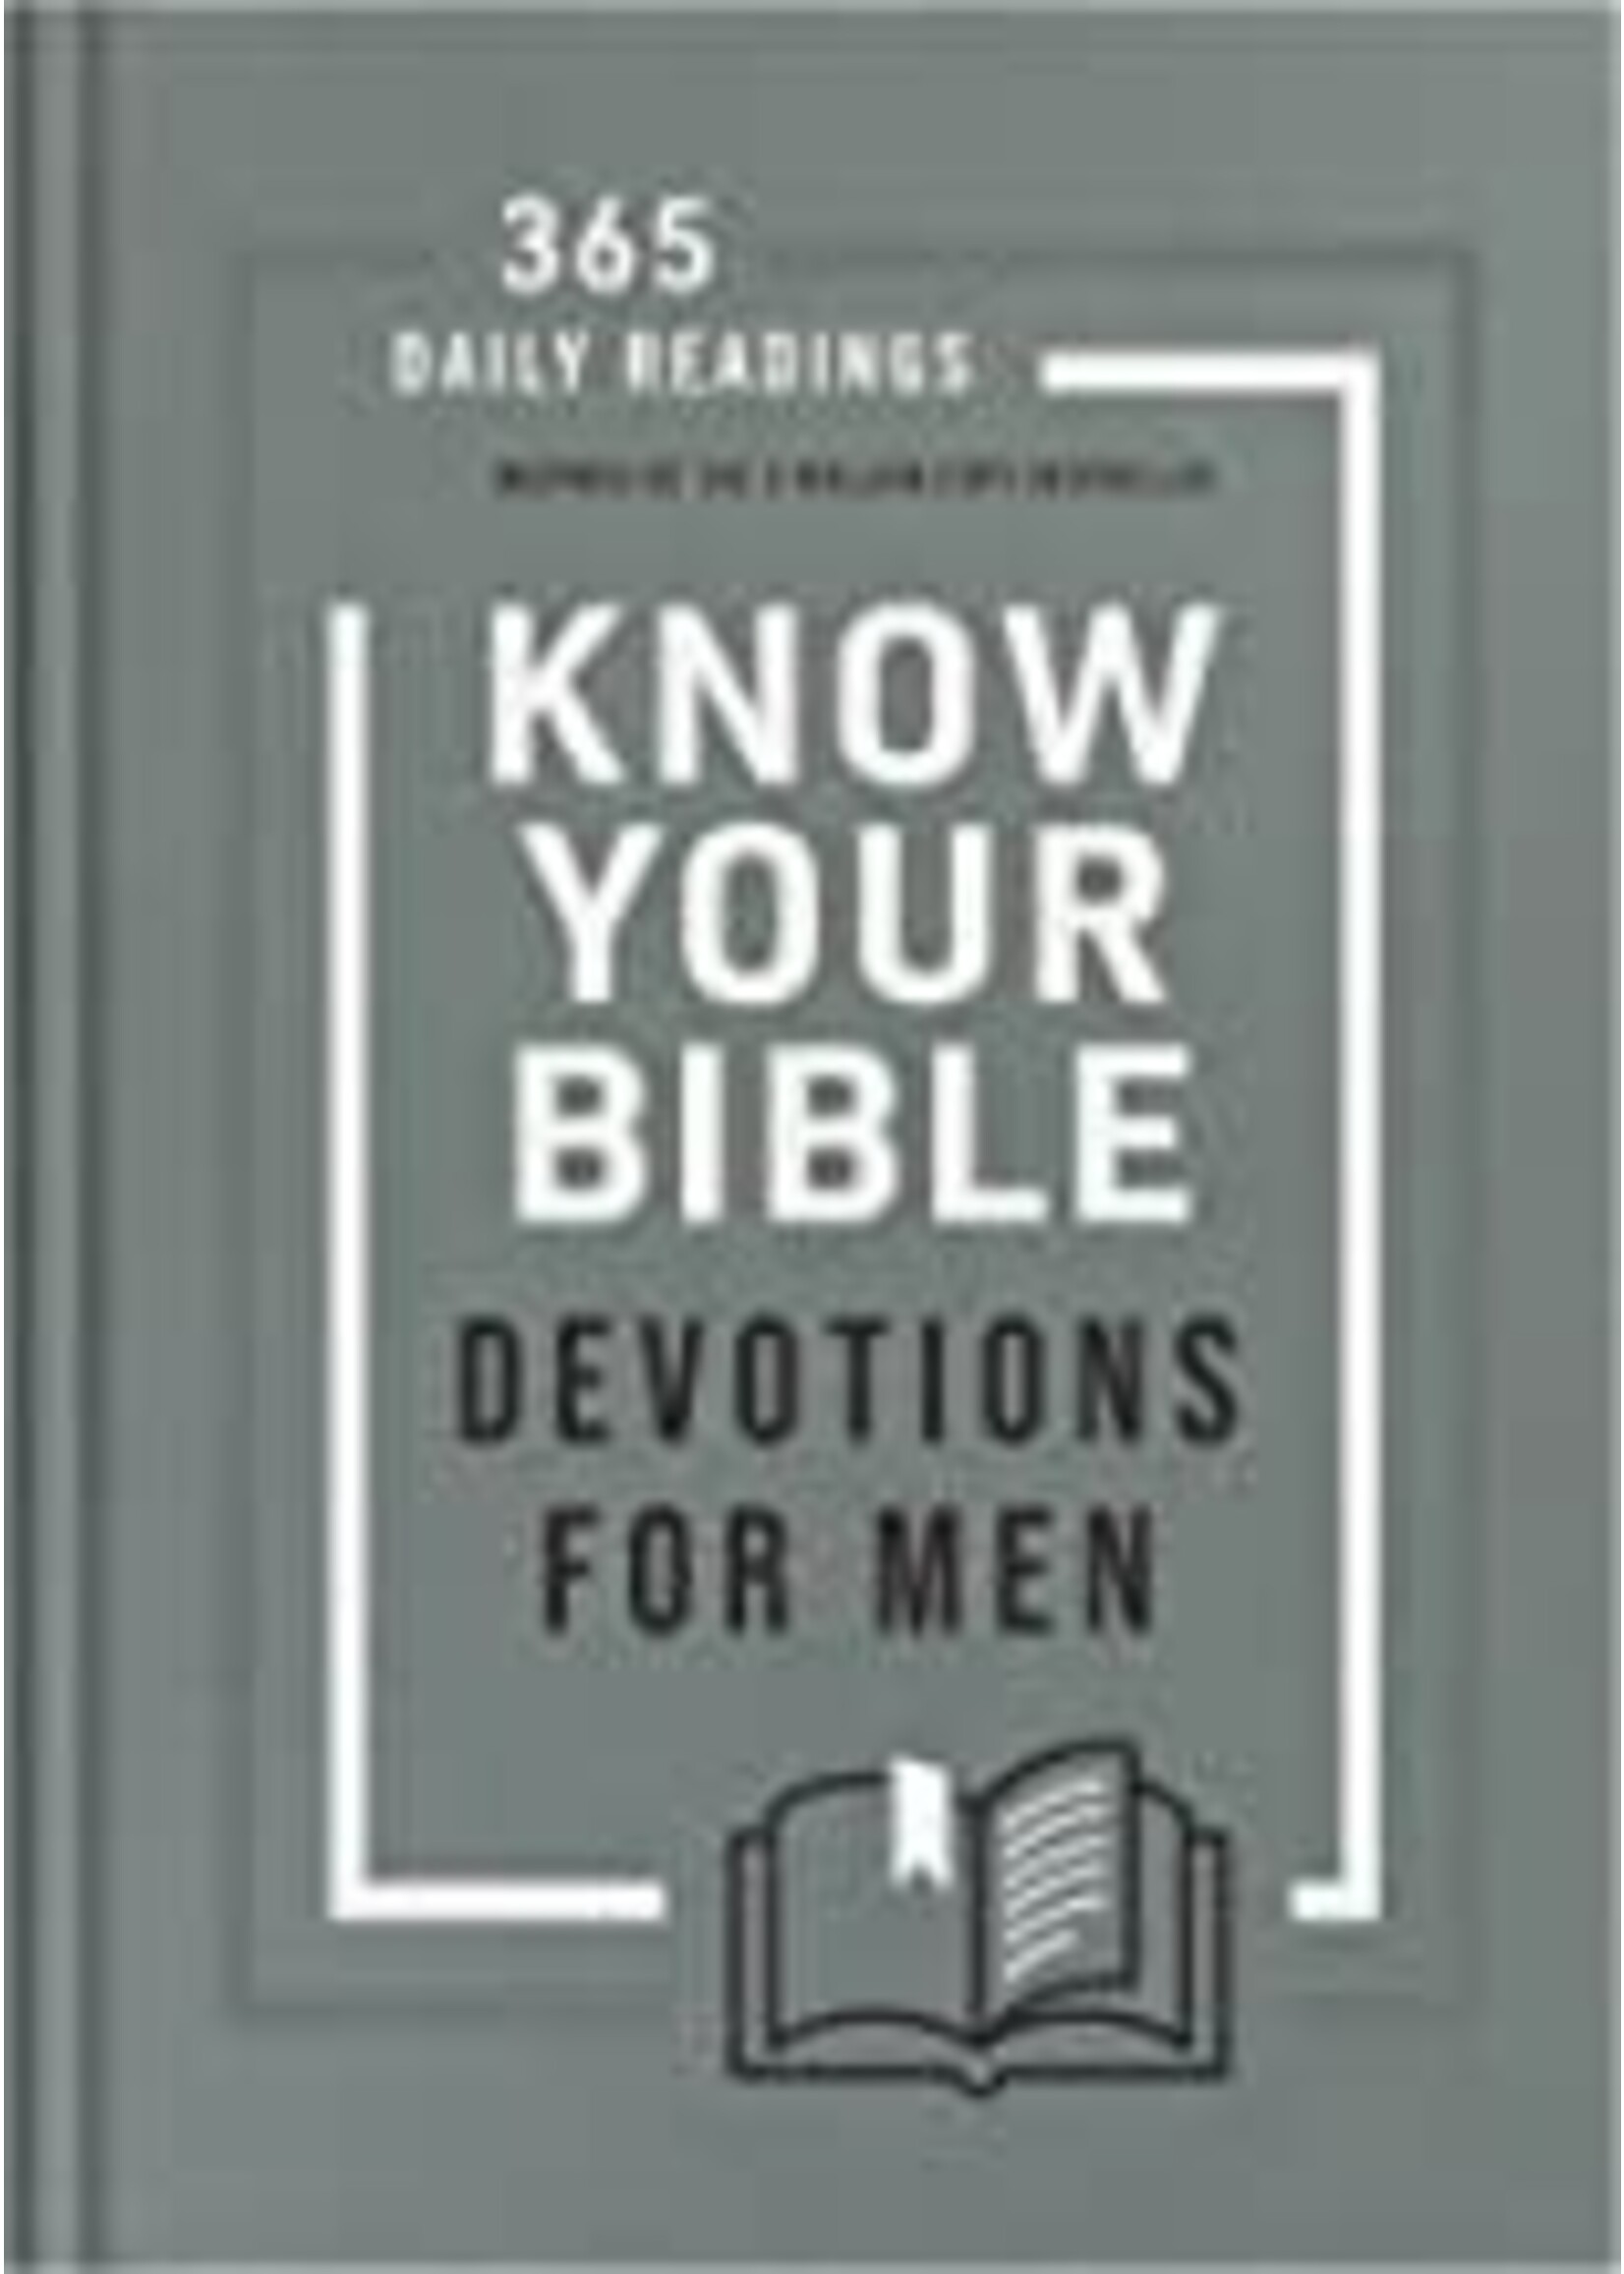 KNOW YOUR BIBLE DEVOTIONS FOR MEN